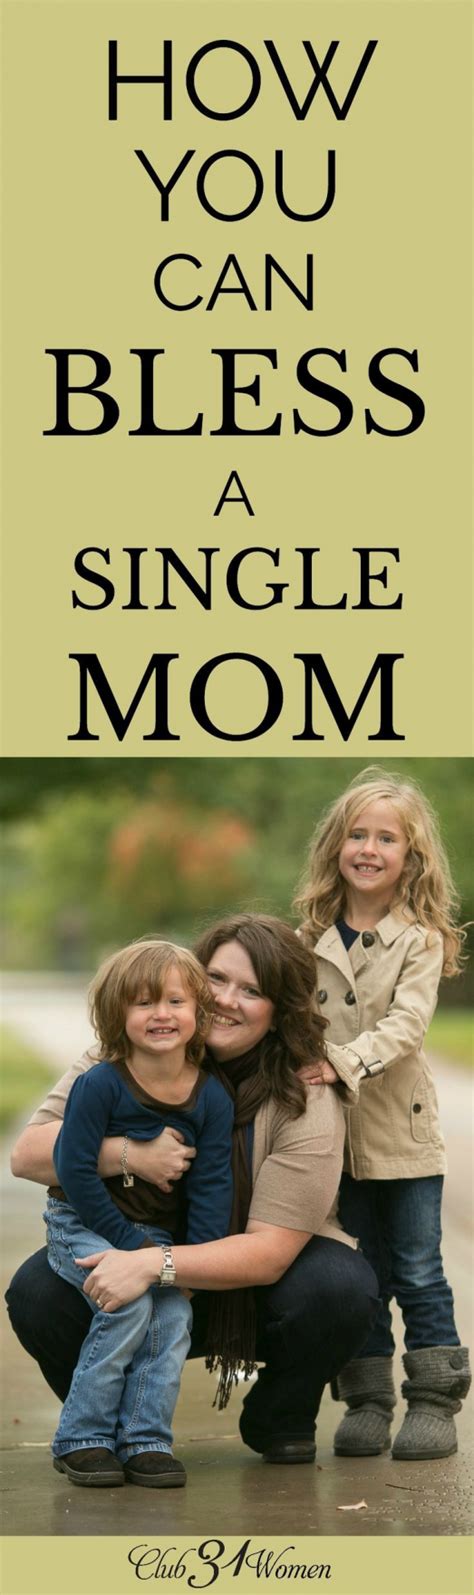 Single Moms Need The Love Of Their Surrounding Community In Ways We May